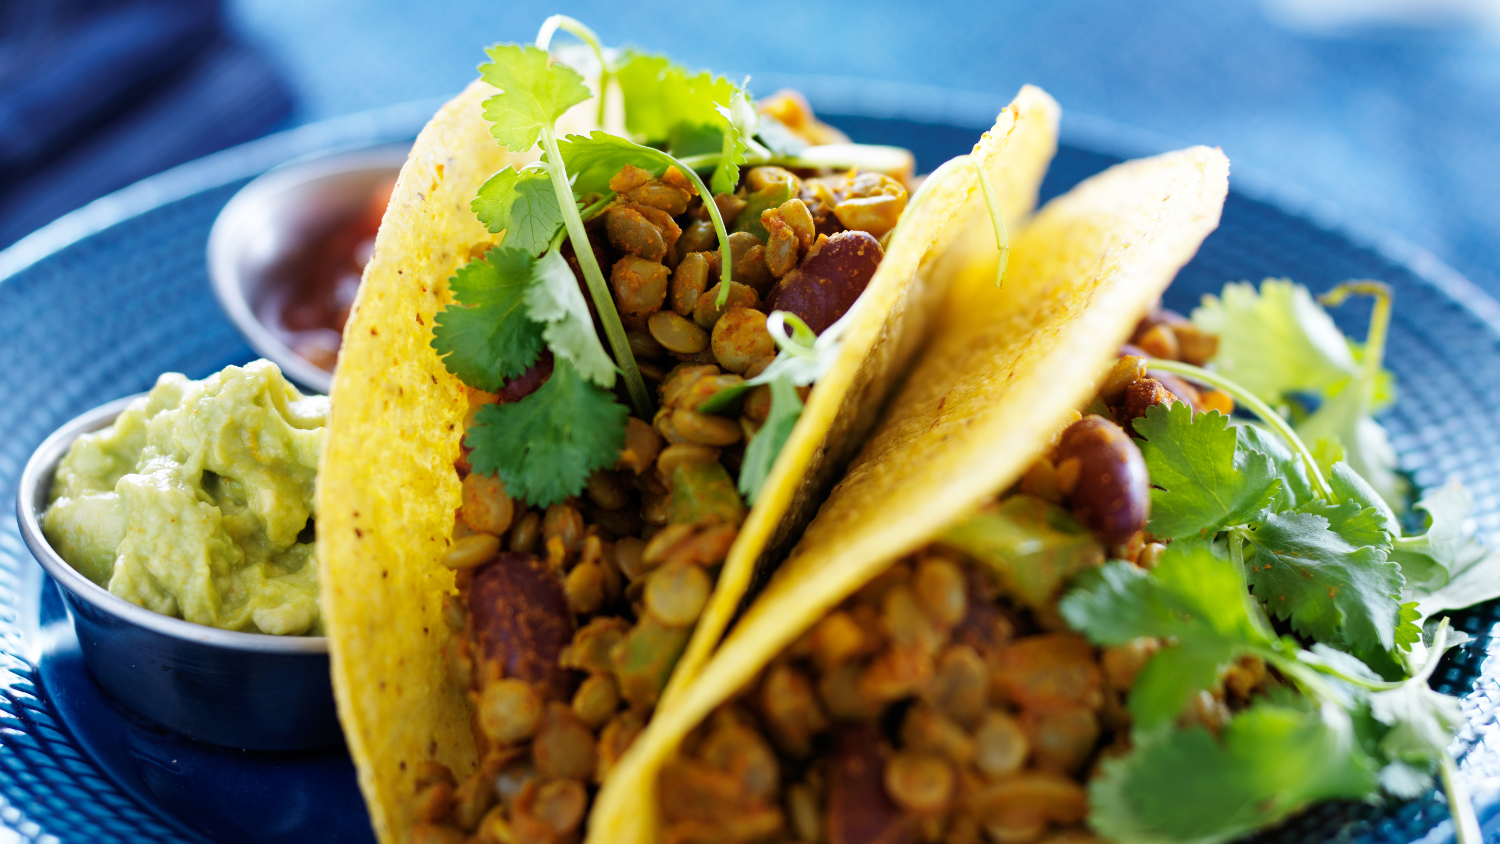 Image for Virtual Class – Budget Cooking: Lentil Tacos with Winter Squash